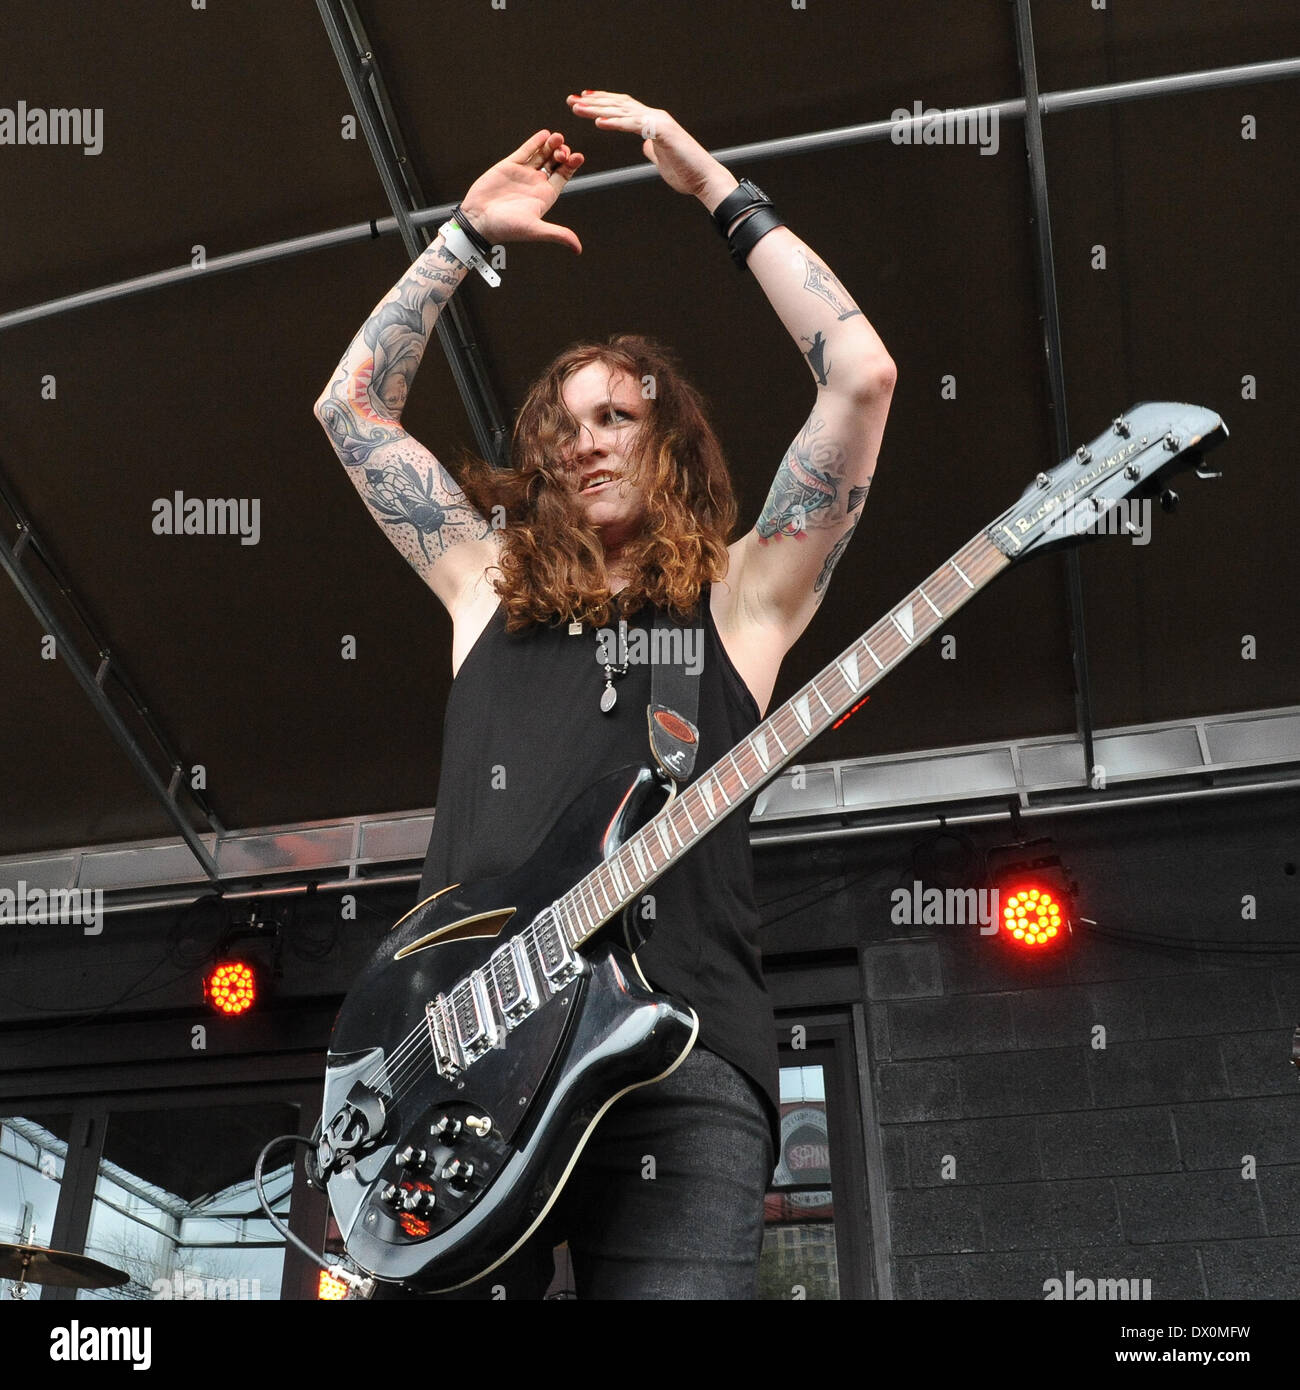 Austin, Texas, USA. 14th Mar, 2014. Laura Jane Grace, born as Thomas James Gabel, with the band Againts Me! performs during South By Southwest (SXSW) SPIN Party at Stubb's on March 14, 2014 in Austin, Texas - USA. (Photo by Manuel Nauta/NurPhoto) Credit:  Manuel Nauta/NurPhoto/ZUMAPRESS.com/Alamy Live News Stock Photo